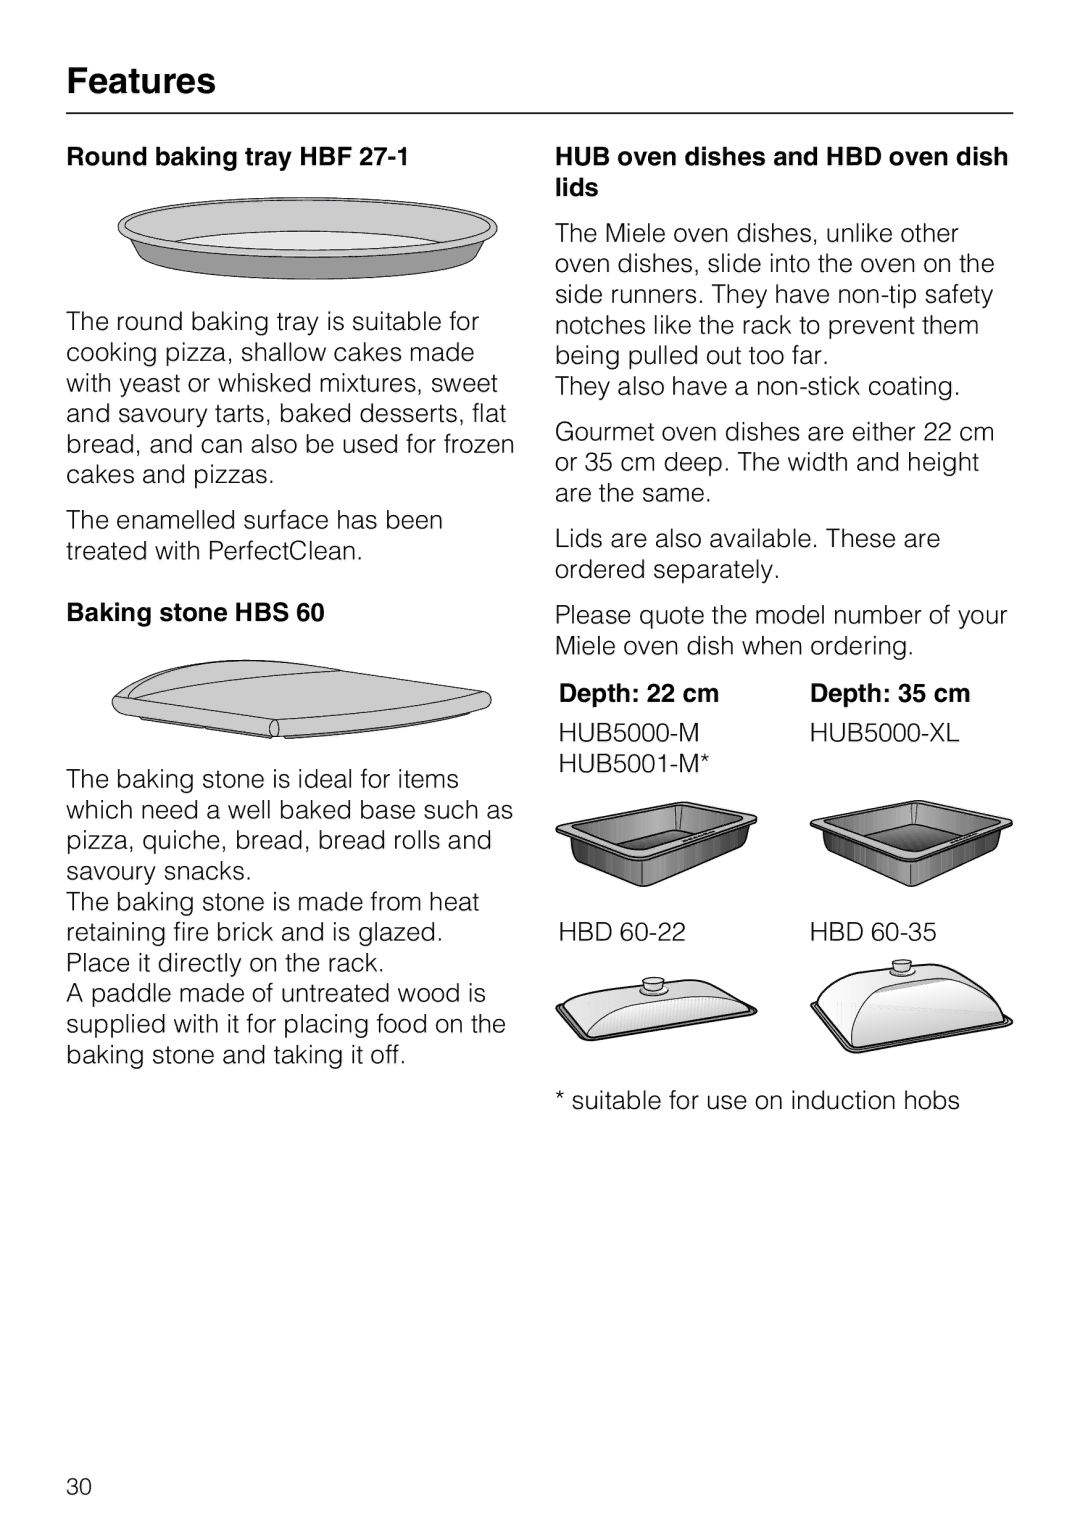 Miele 10 110 510 Round baking tray HBF, Baking stone HBS, HUB oven dishes and HBD oven dish lids, Depth 22 cm Depth 35 cm 